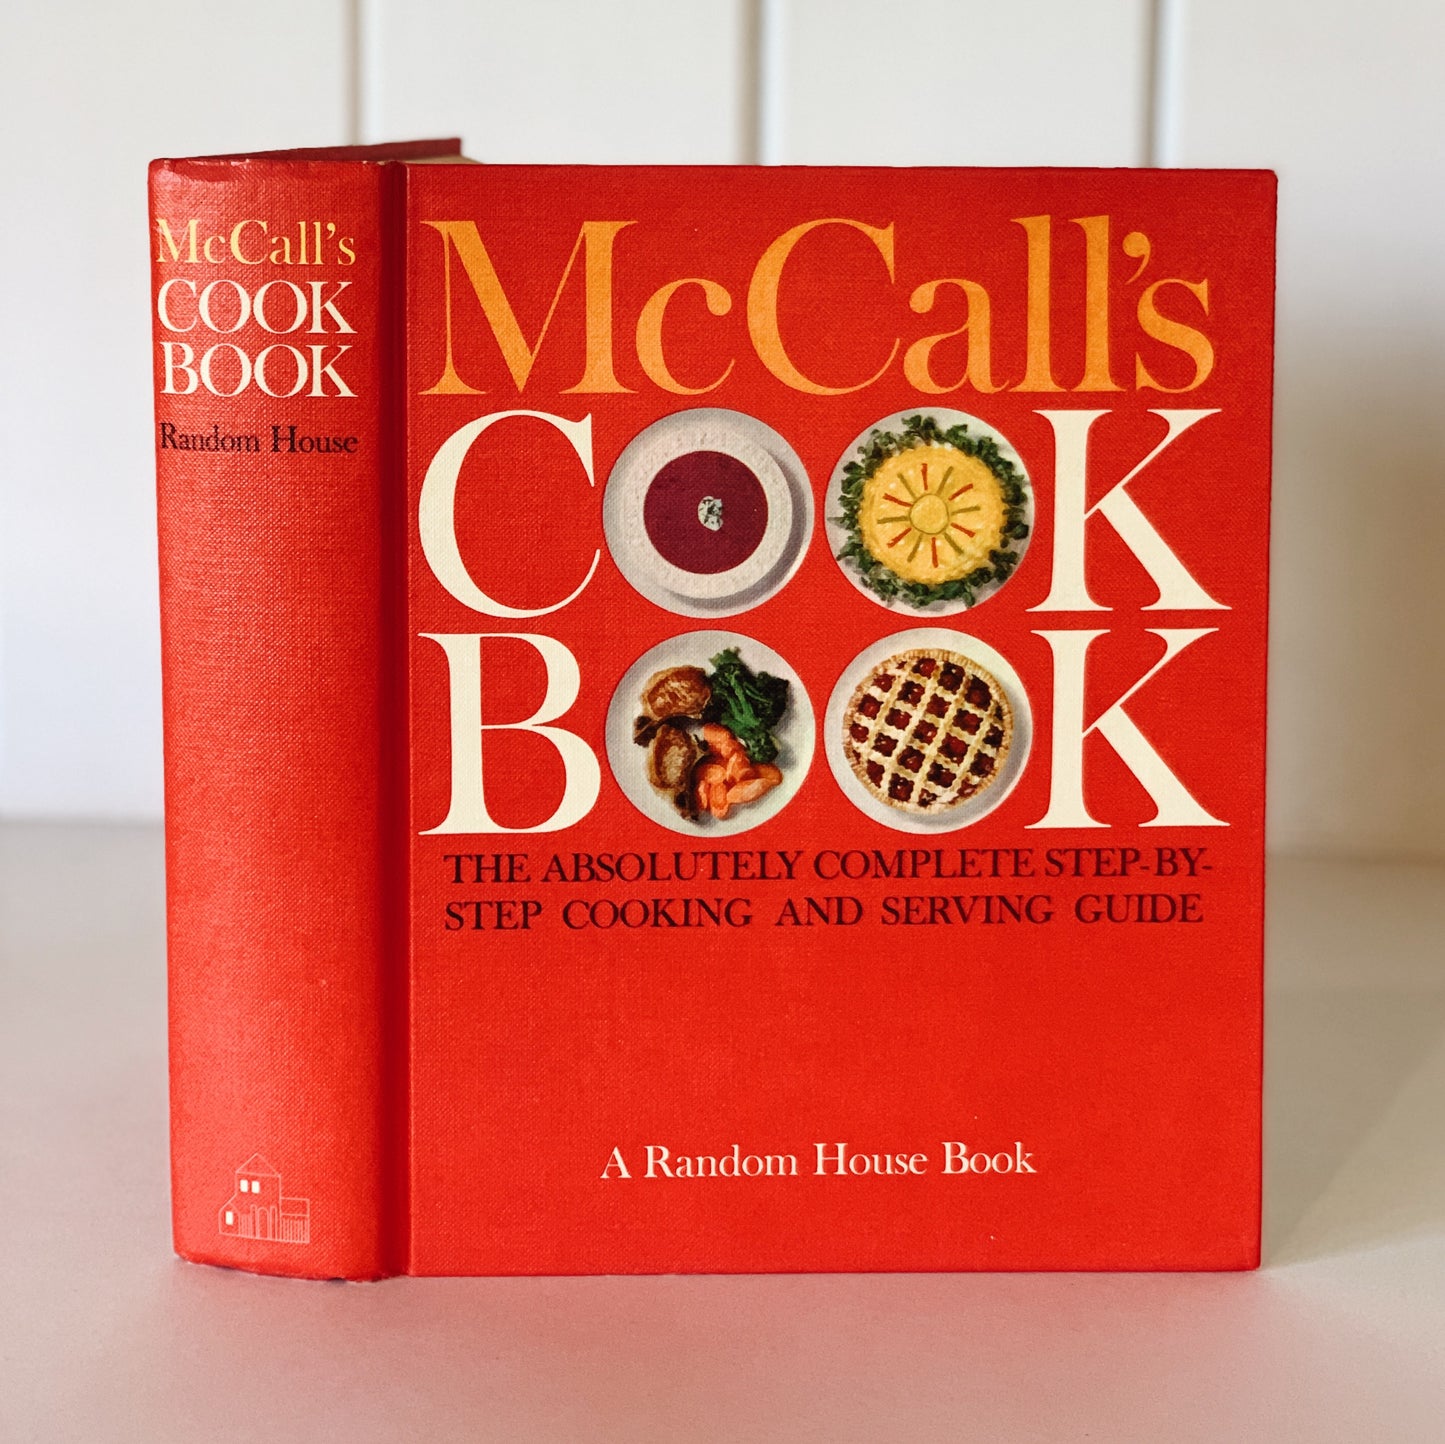 McCall's Cook Book, 1963, First Printing, Hardcover